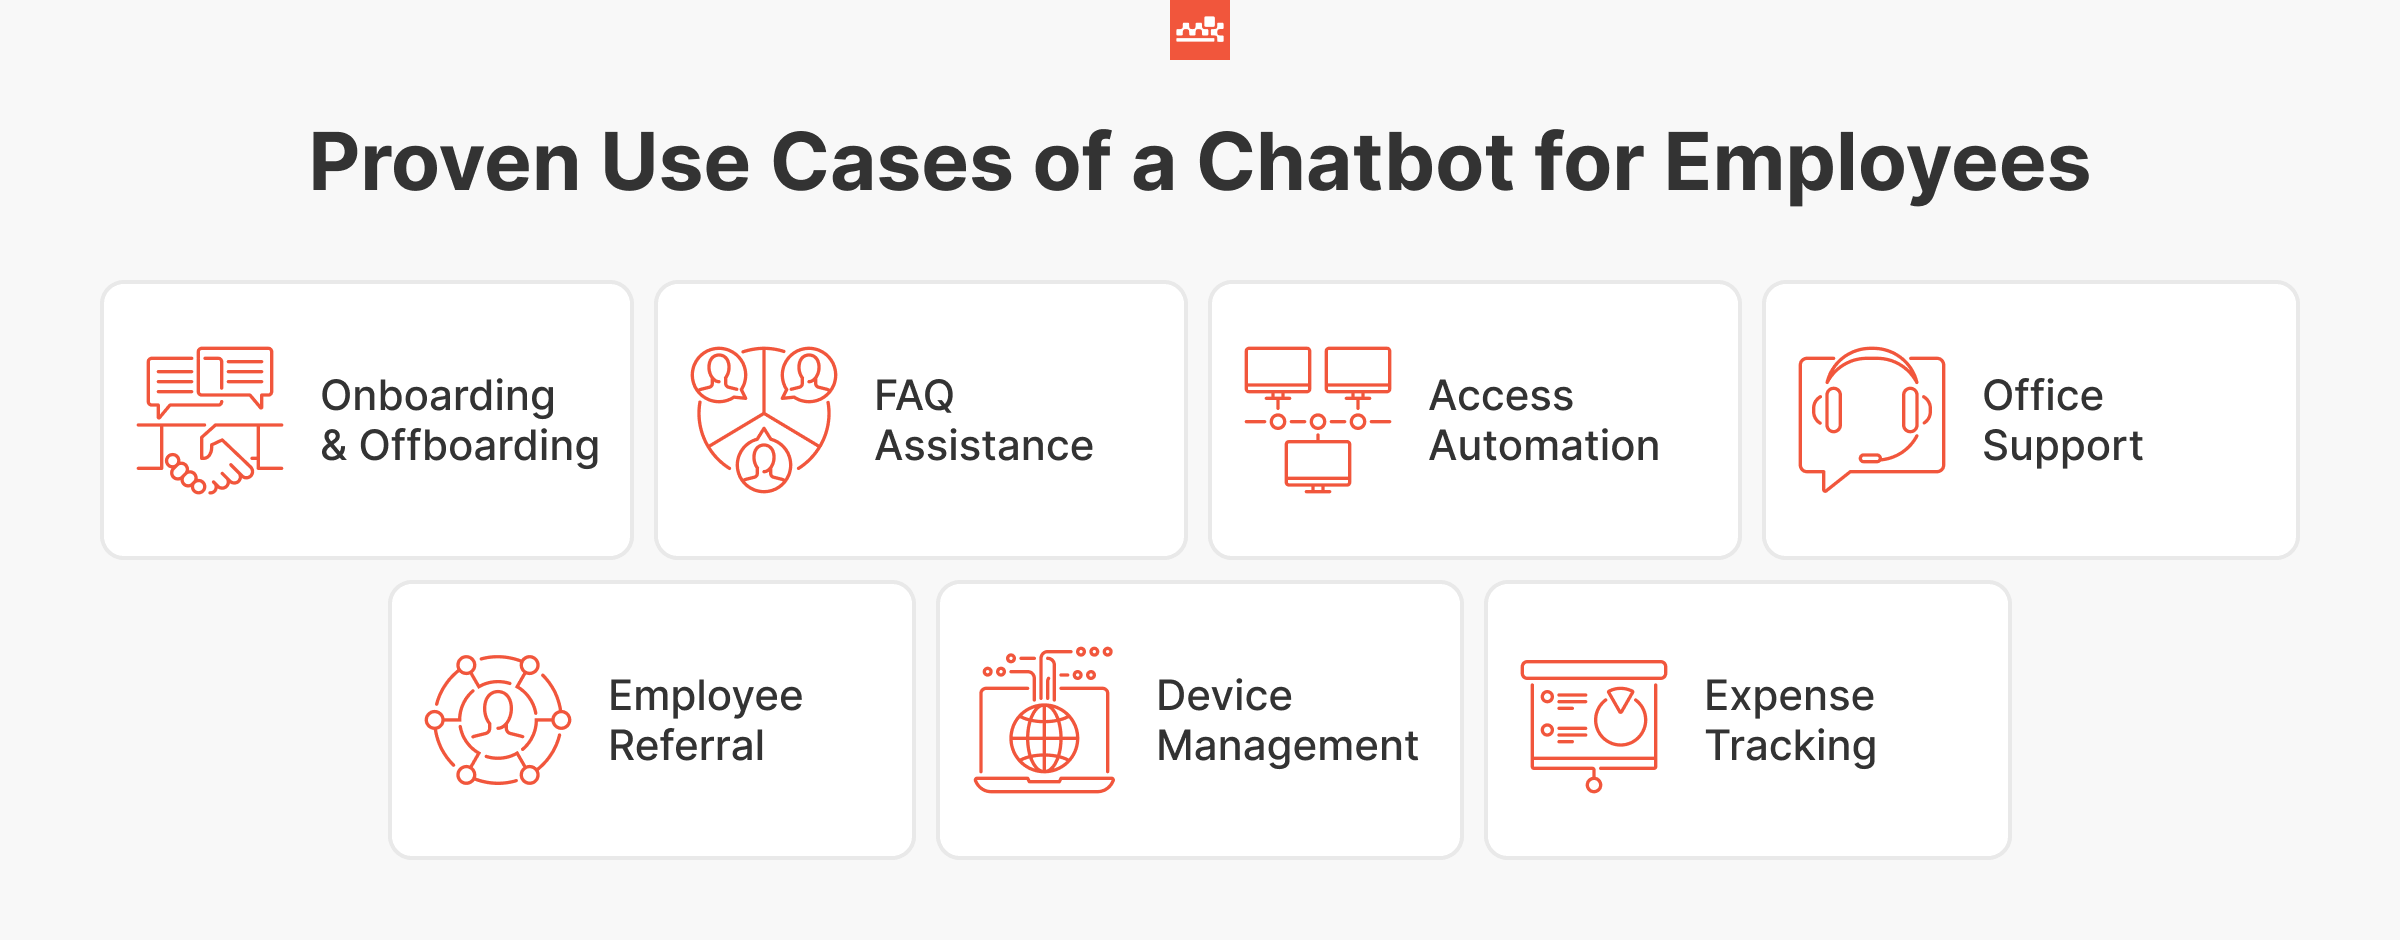 Use Cases of a Chatbot for Employees